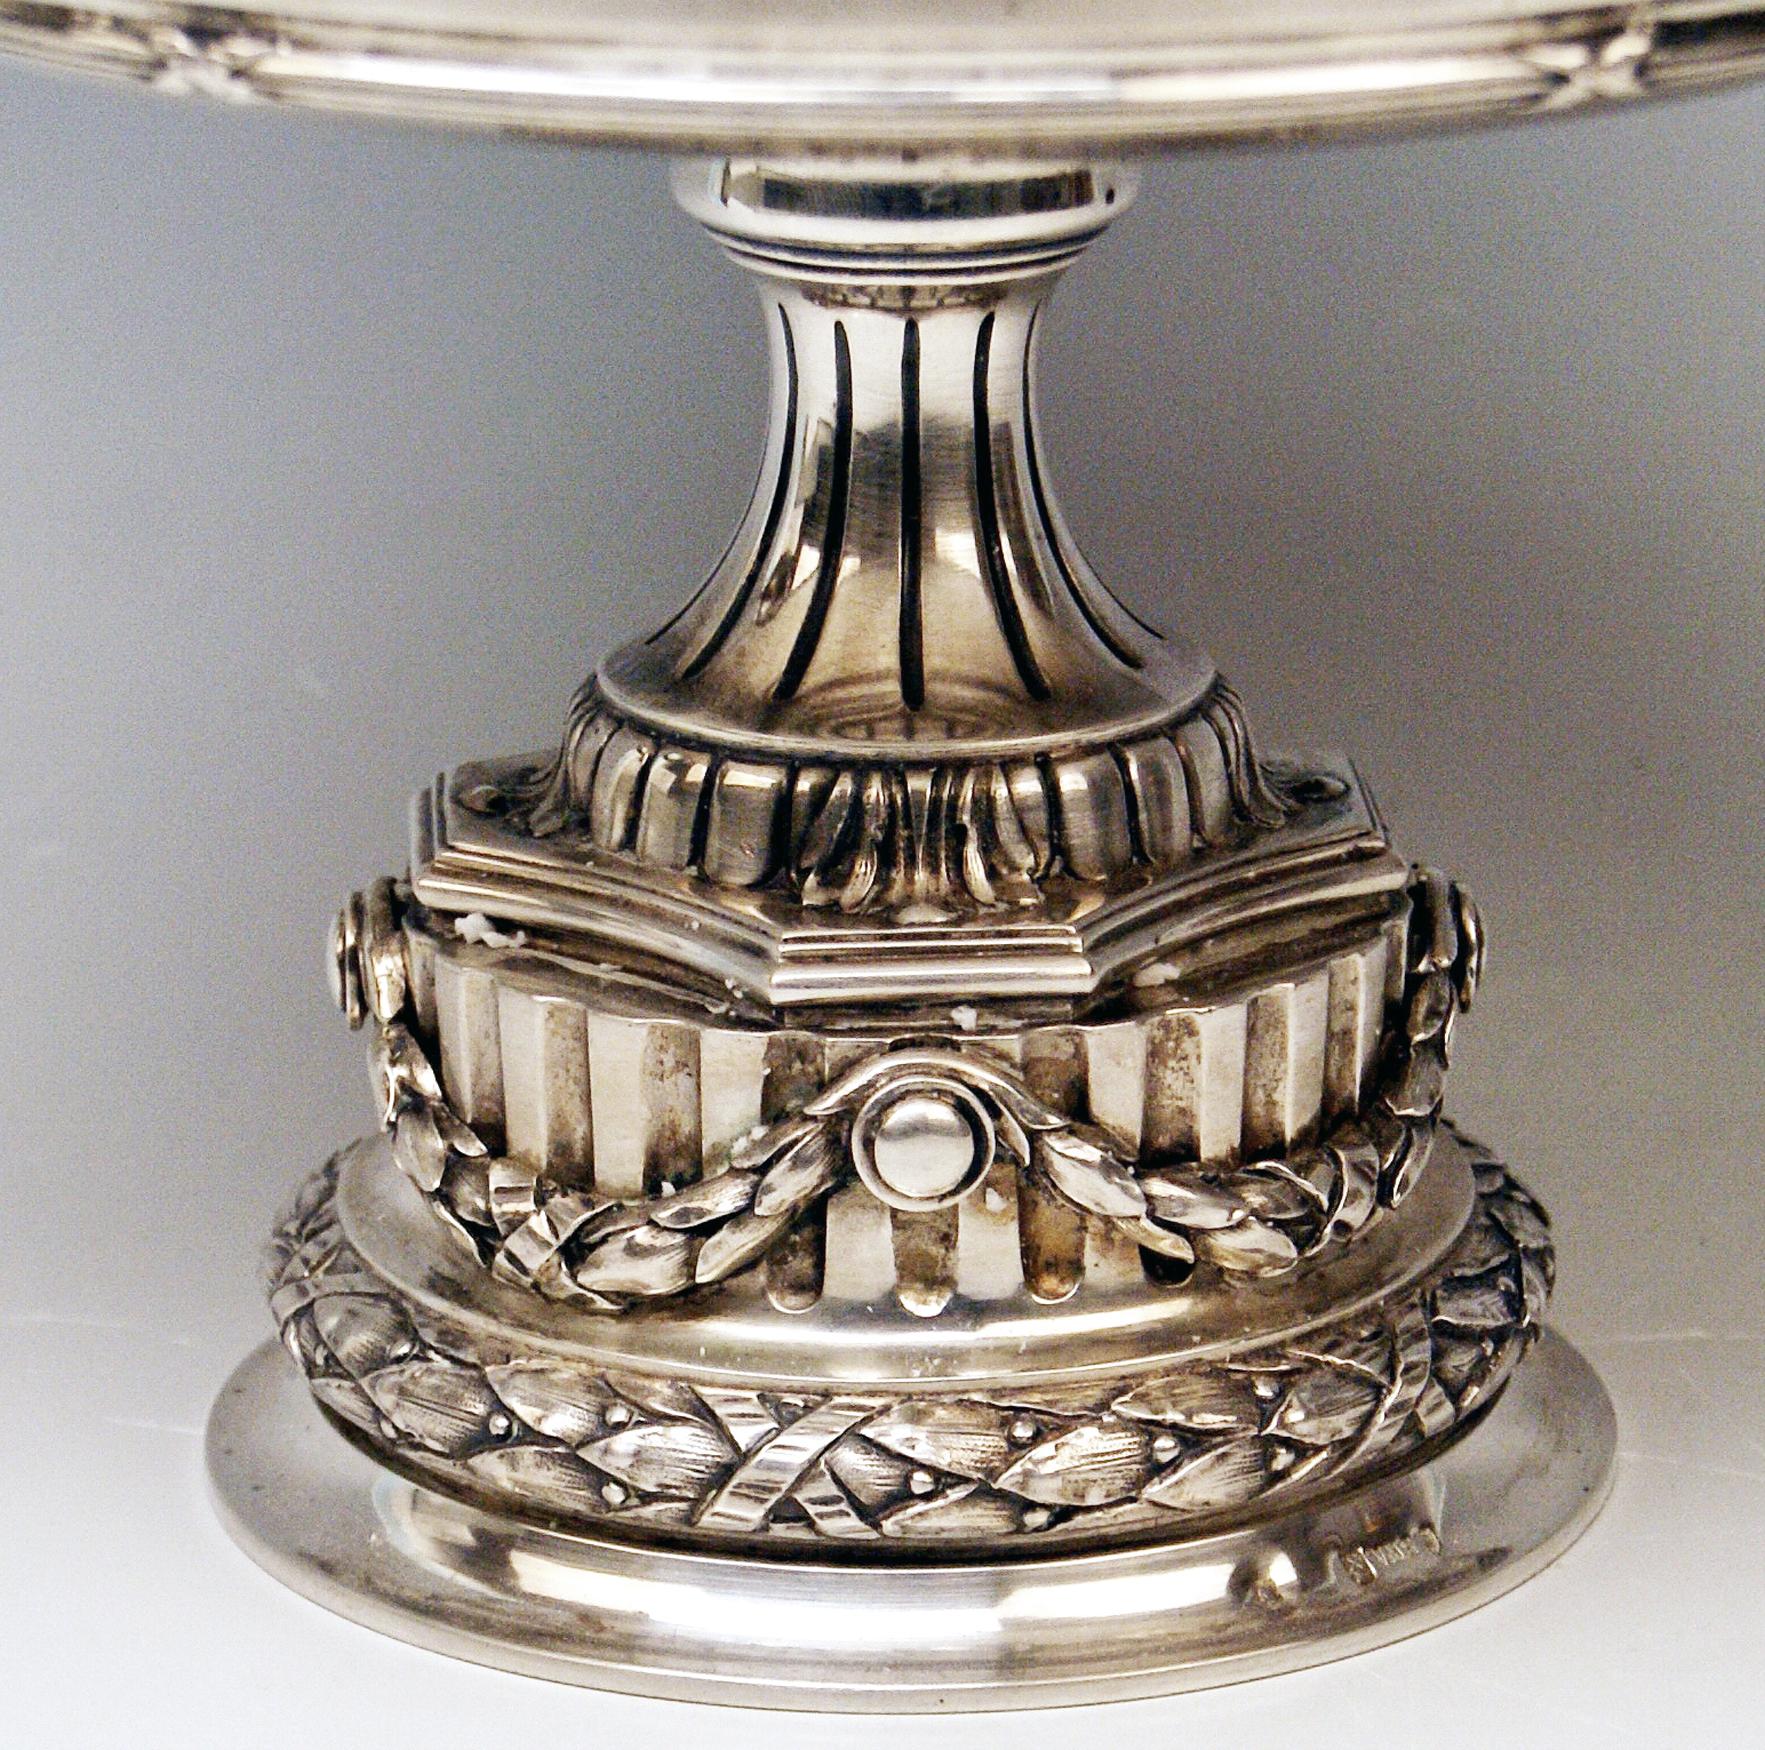 Stunning Silver 800 Austrian / Viennese centrepiece with original glass liner, made during last quarter of the 19th century.

Hallmarked:
Viennese Official Silver Stamp = Diana's Head Mark with A for Vienna as it was used for Silver 800 as from